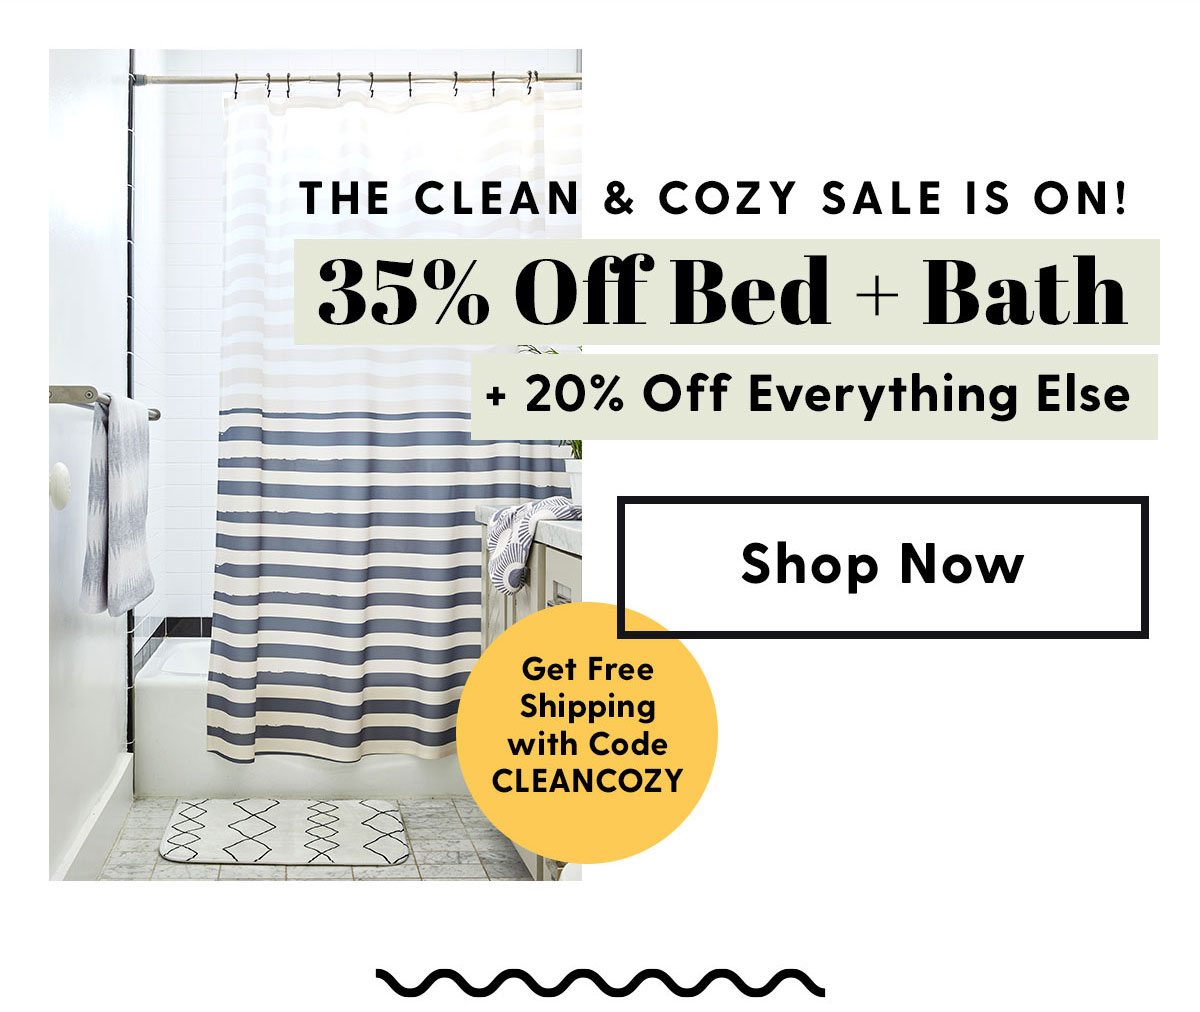 The Clean & Cozy Sale is On! 35% Off Bed + Bath + 20% Off Everything Else. Get Free Shipping with Code CLEANCOZY. Shop Now